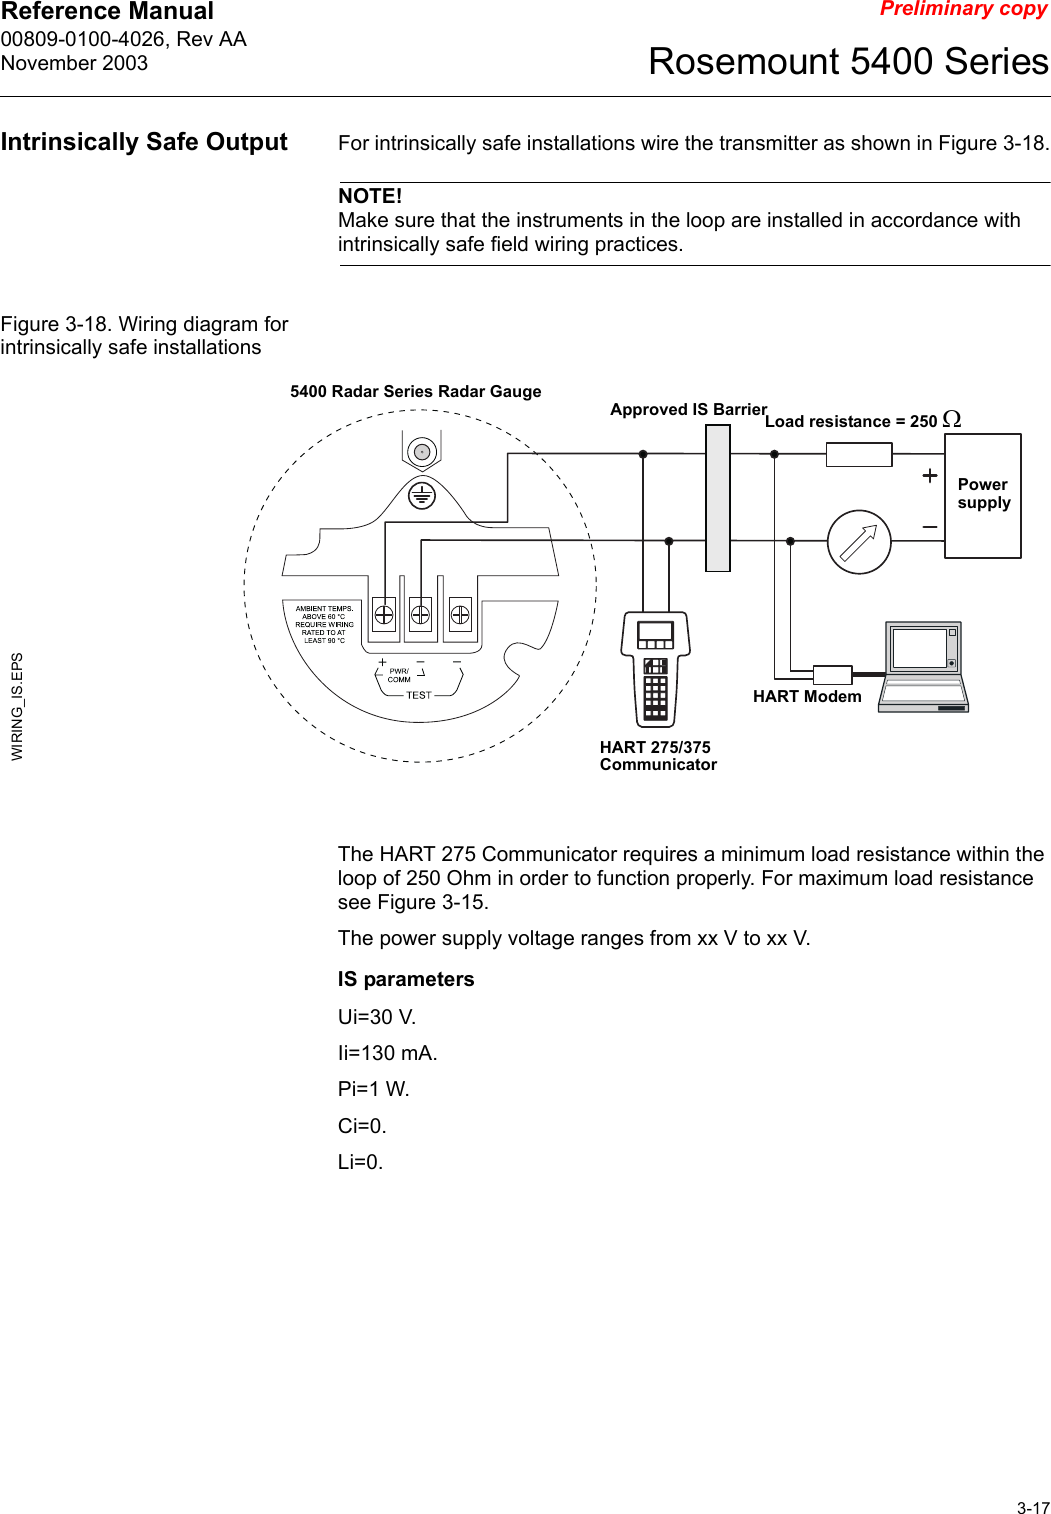 Reference Manual 00809-0100-4026, Rev AANovember 20033-17Rosemount 5400 SeriesPreliminary copyIntrinsically Safe Output For intrinsically safe installations wire the transmitter as shown in Figure 3-18.NOTE!Make sure that the instruments in the loop are installed in accordance with intrinsically safe field wiring practices.Figure 3-18. Wiring diagram for intrinsically safe installationsThe HART 275 Communicator requires a minimum load resistance within the loop of 250 Ohm in order to function properly. For maximum load resistance see Figure 3-15. The power supply voltage ranges from xx V to xx V.IS parametersUi=30 V.Ii=130 mA.Pi=1 W.Ci=0.Li=0.Power supplyWIRING_IS.EPSHART 275/375 CommunicatorLoad resistance = 250 ΩHART Modem5400 Radar Series Radar GaugeApproved IS Barrier